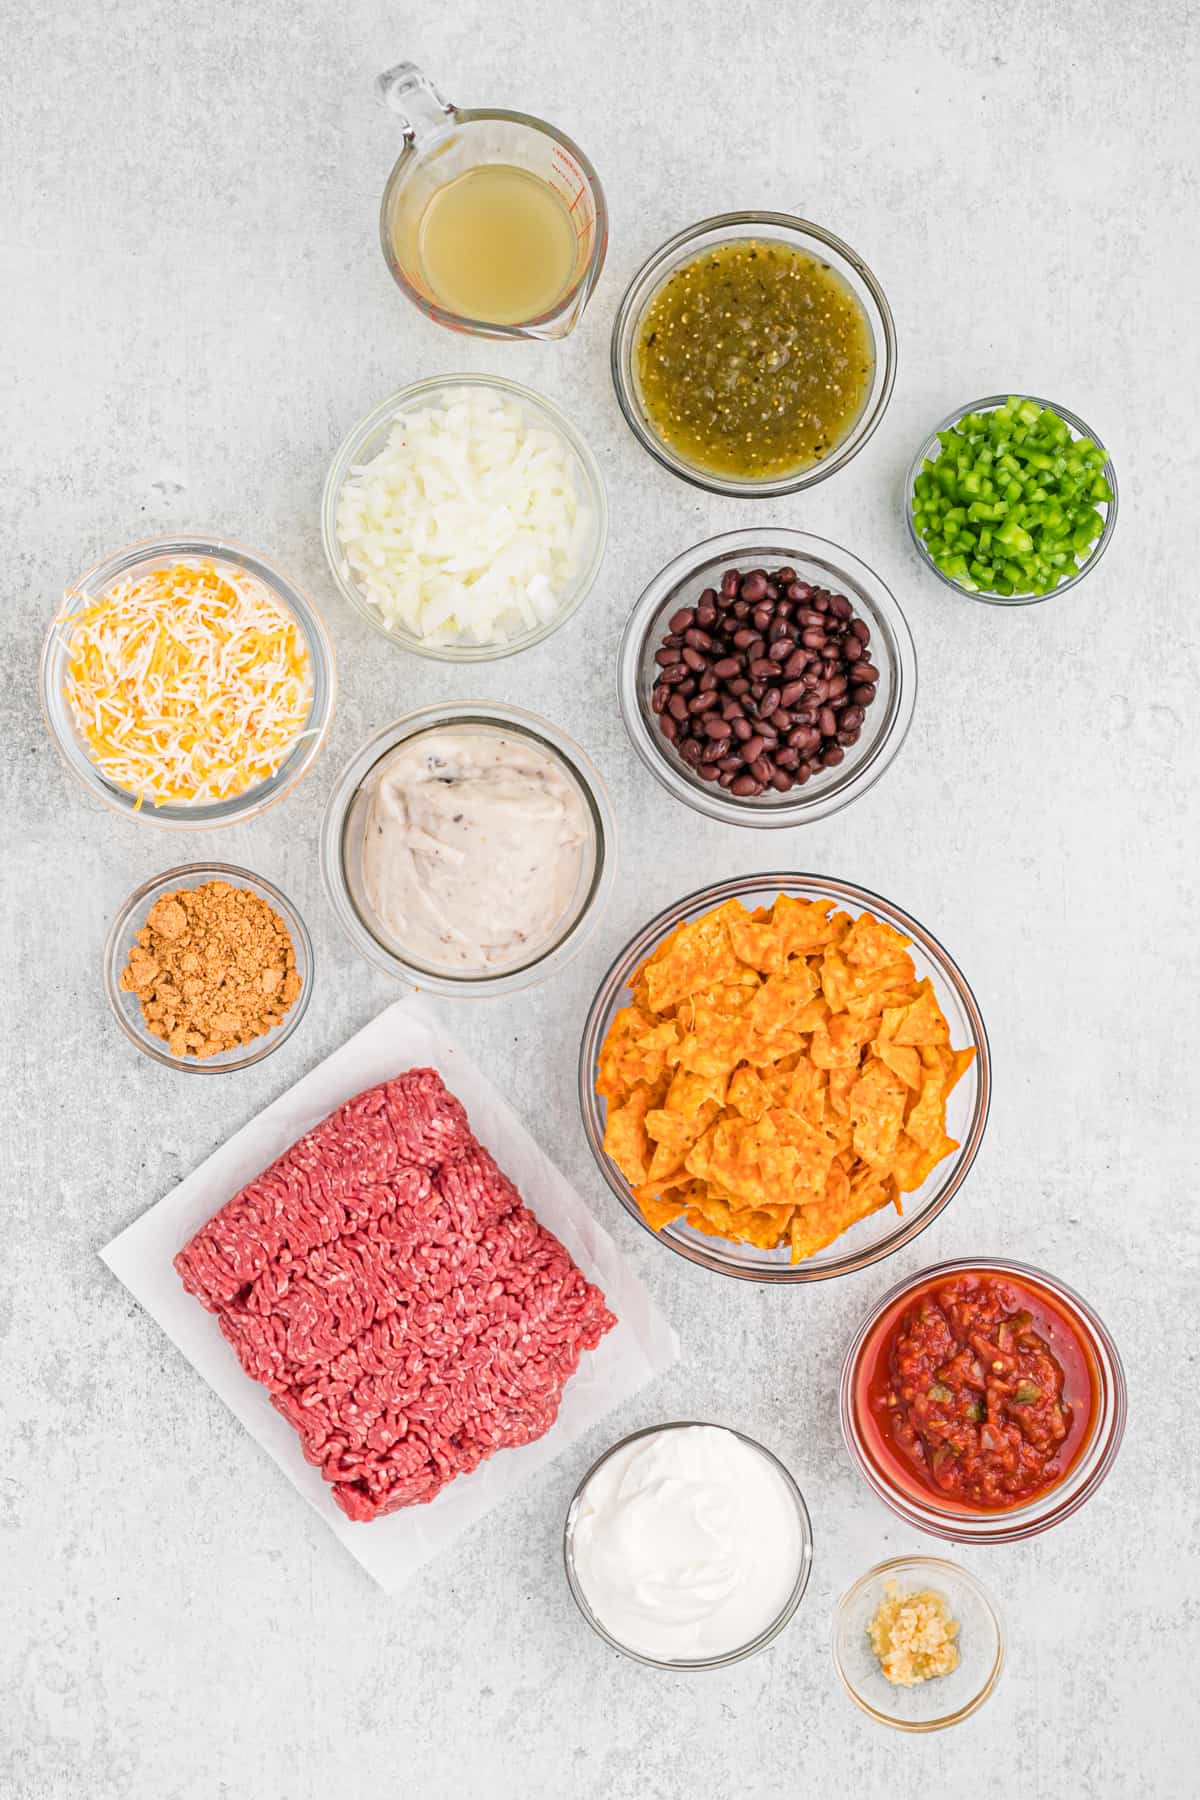 Ingredients in clear bowls to make a dorito casserole